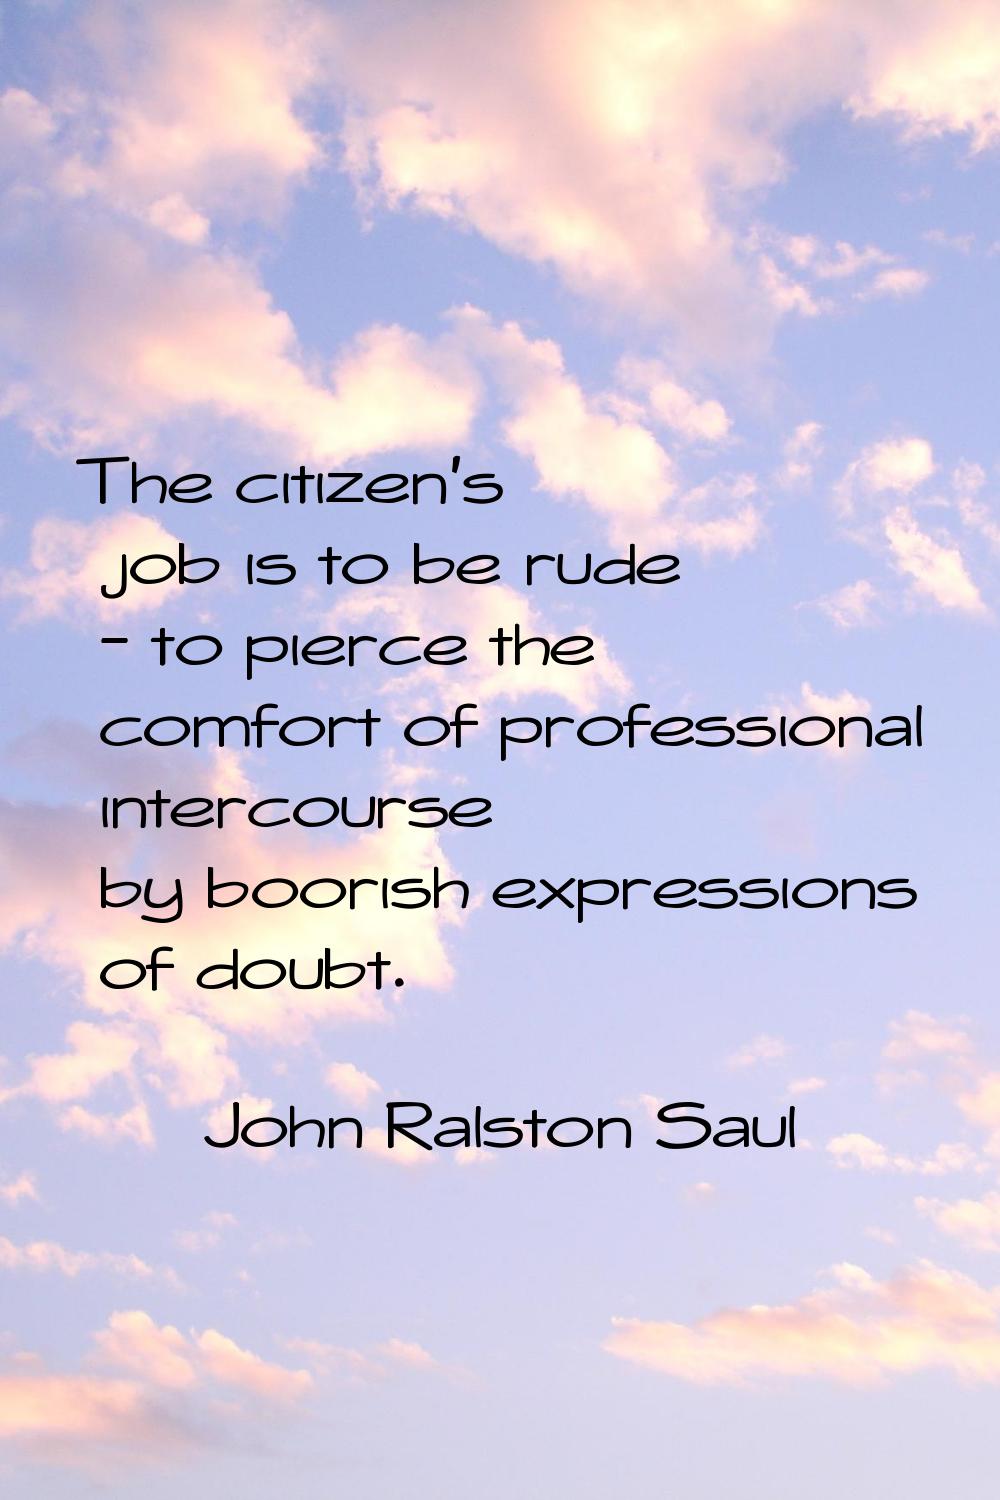 The citizen's job is to be rude - to pierce the comfort of professional intercourse by boorish expr